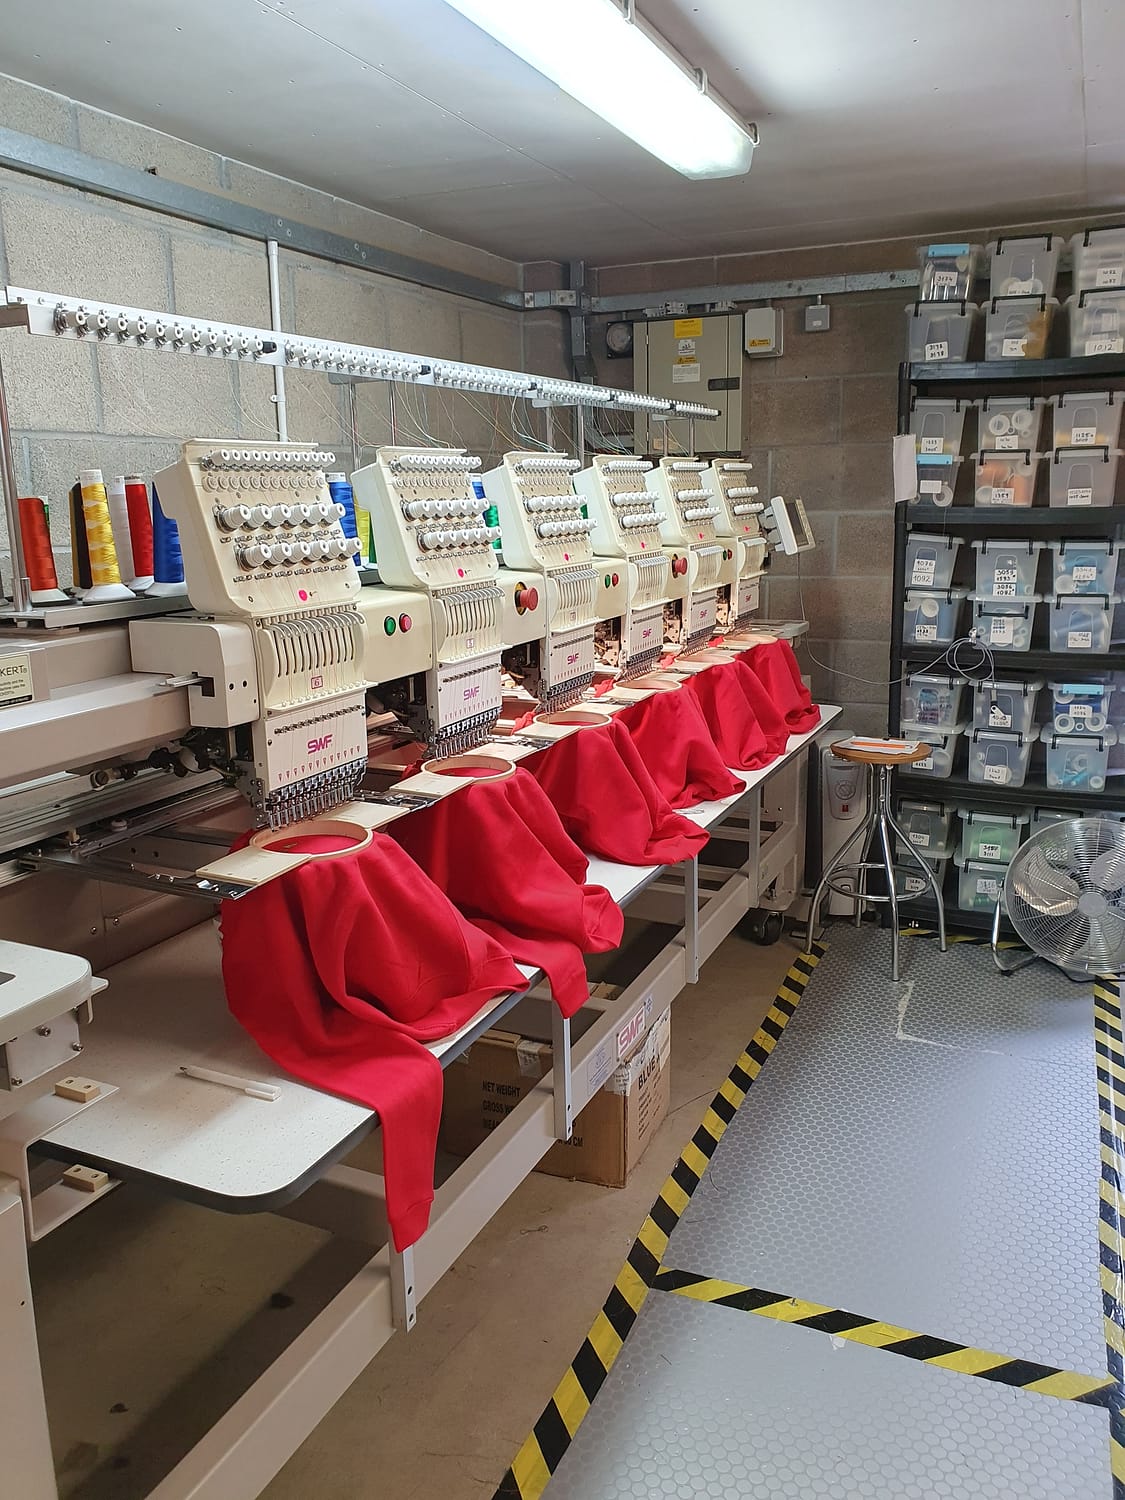 A line of embroidery machines